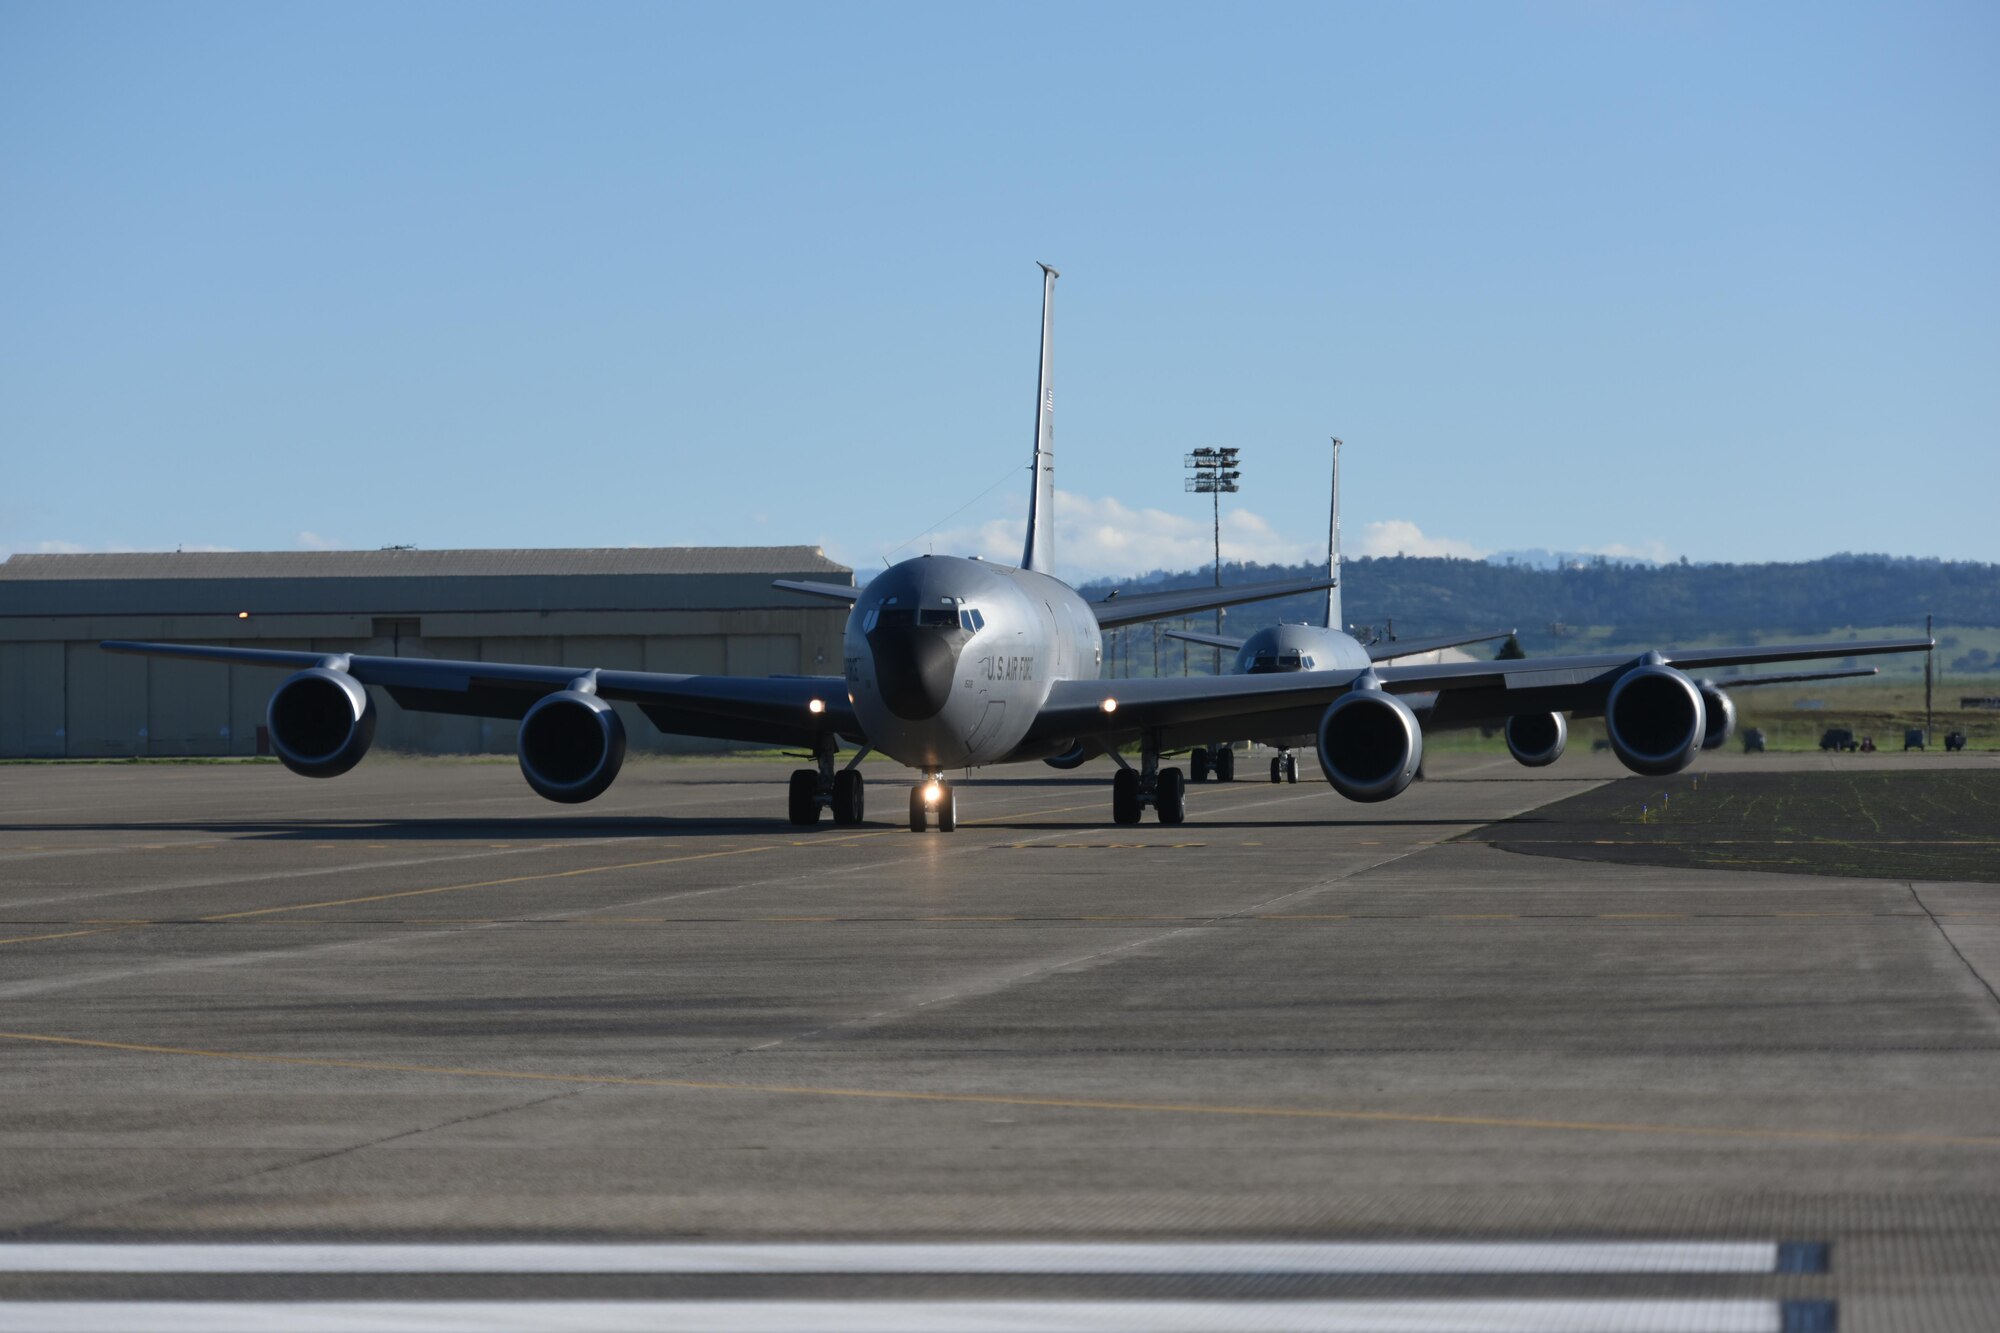 Two KC-135 Stratotankers from the 314th Air Refueling Squadron taxi down the runway during a unit training assembly at Beale Air Force Base, California on Feb. 11, 2017. The aircraft were preparing to take off as part of a two-ship aircraft formation training sortie early Saturday morning to refuel eight F-15 Eagles from the 173rd Fighter Wing stationed at Kingsley Field Air National Guard Base, Oregon. (U.S. Air Force photo by Staff Sgt. Brenda Davis).